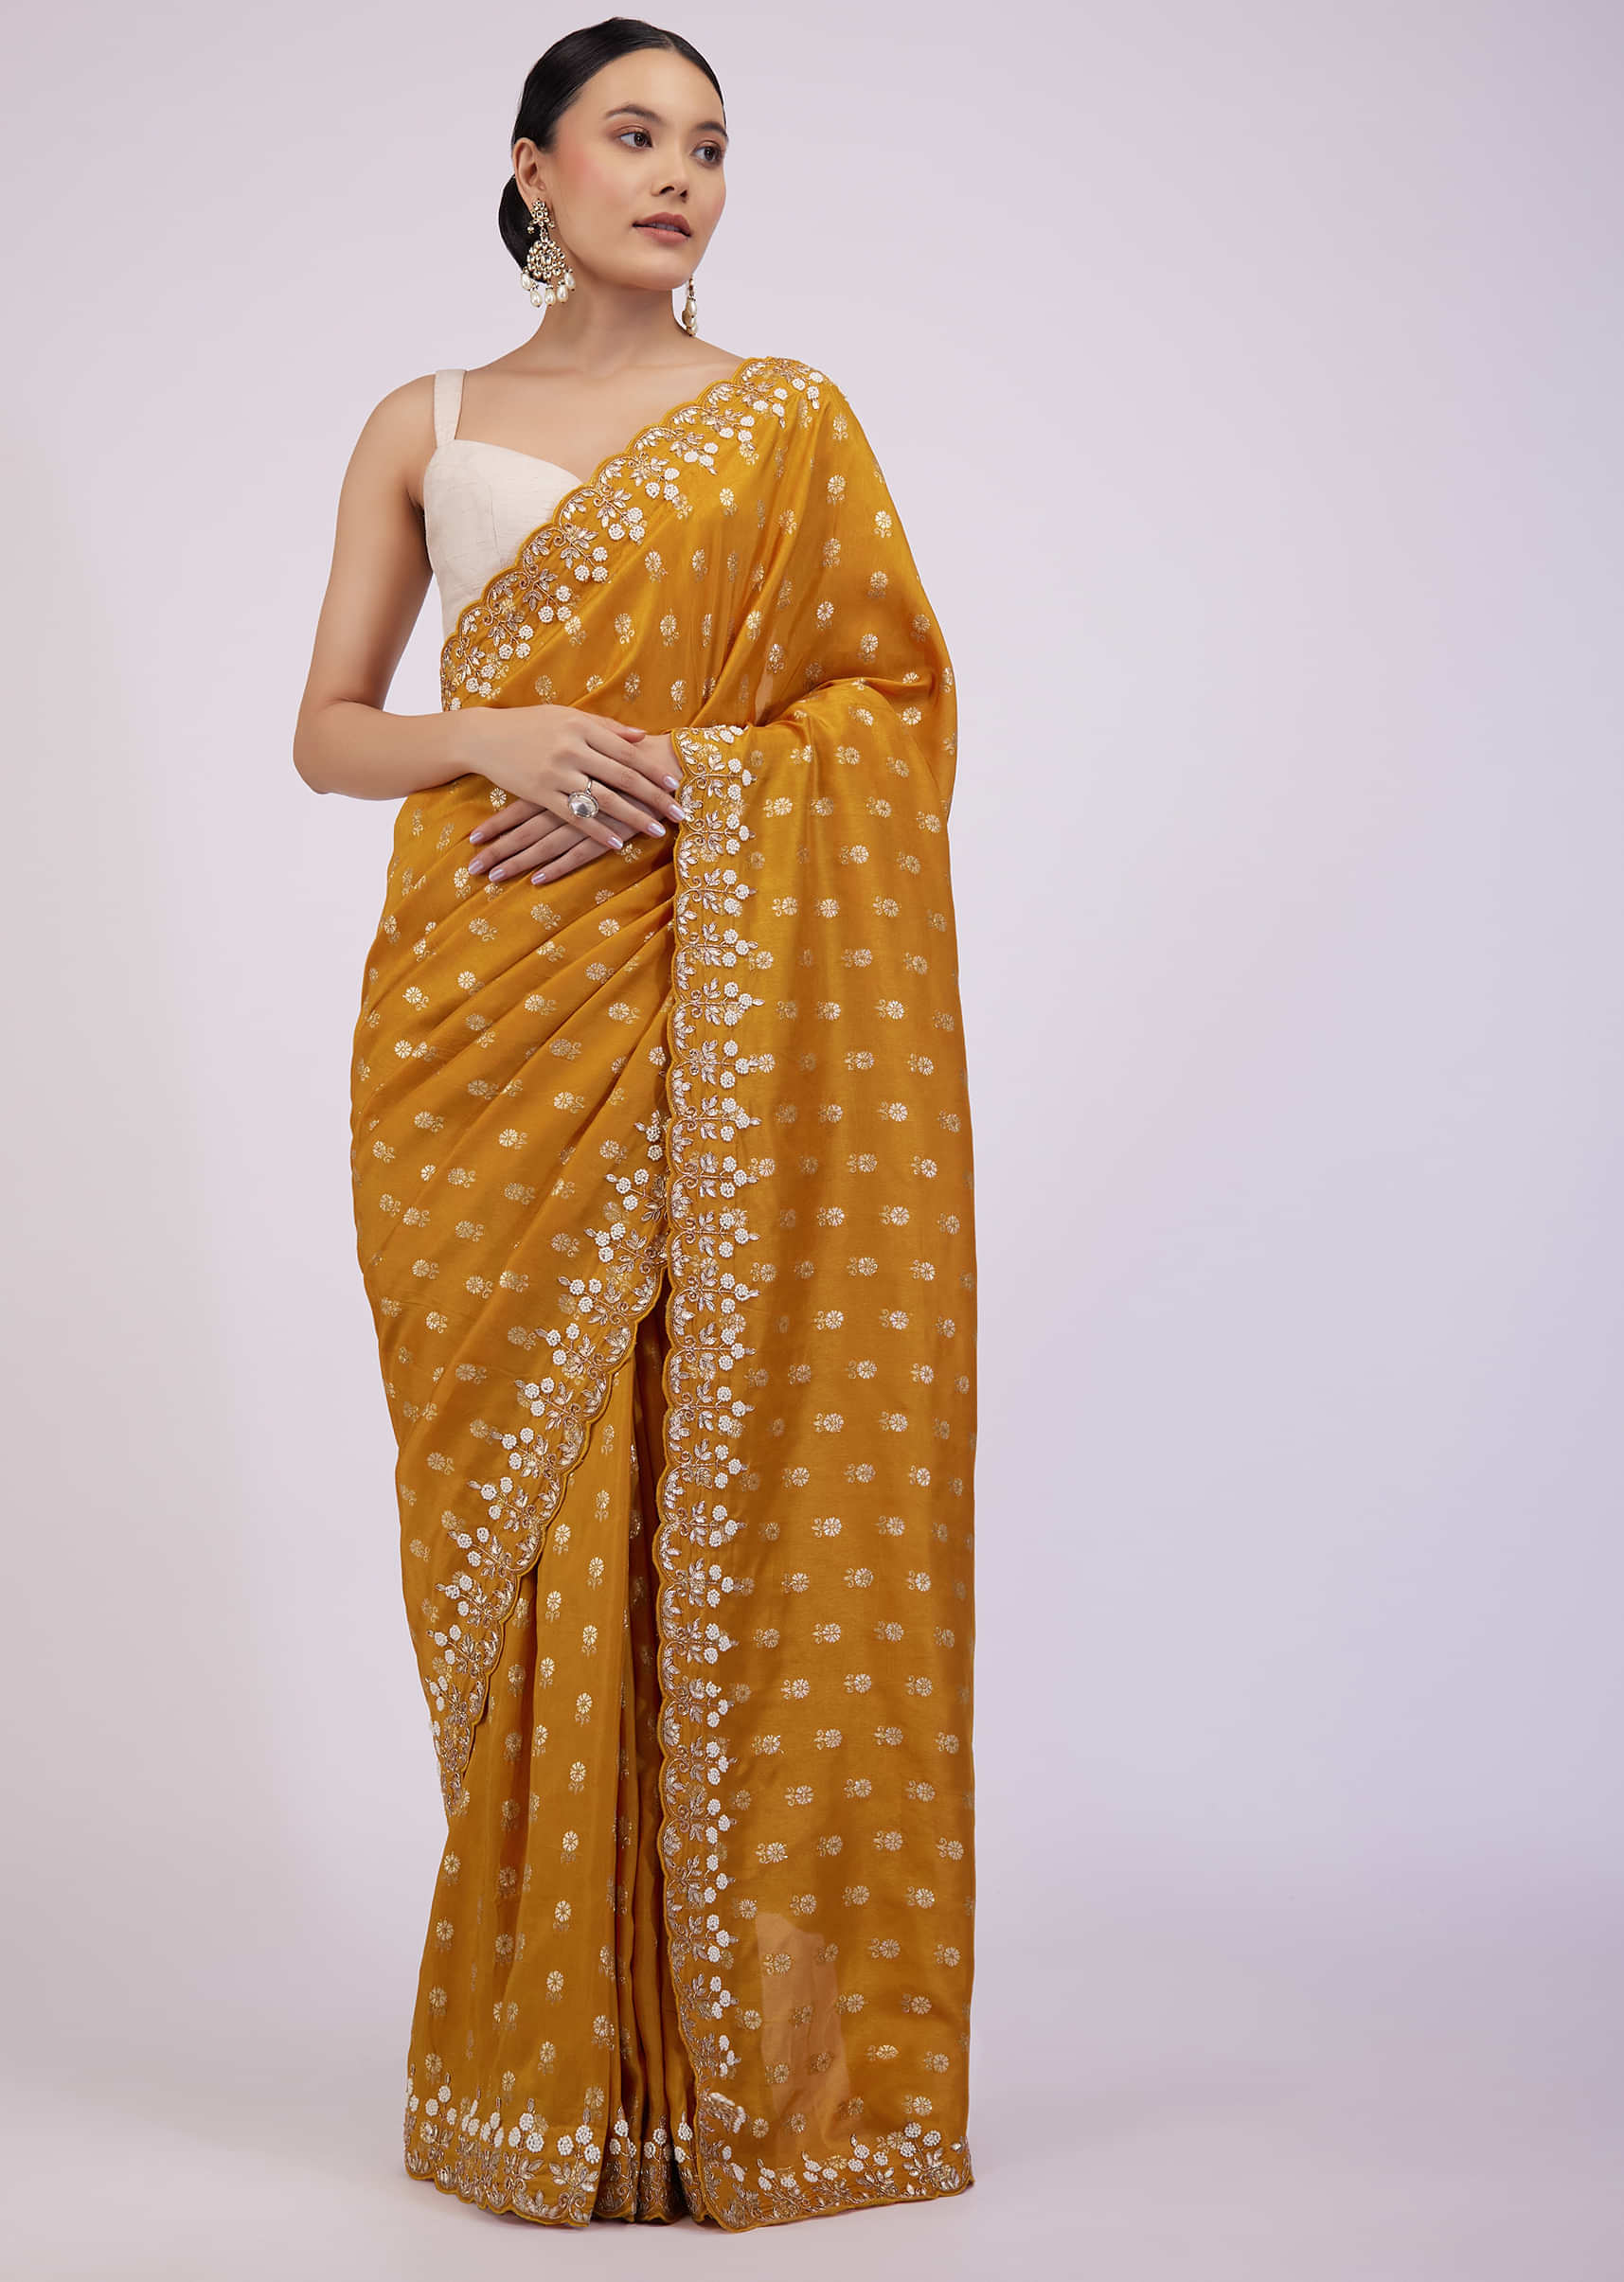 Ocher Yellow Silk Saree With Foil Print And Embroidery